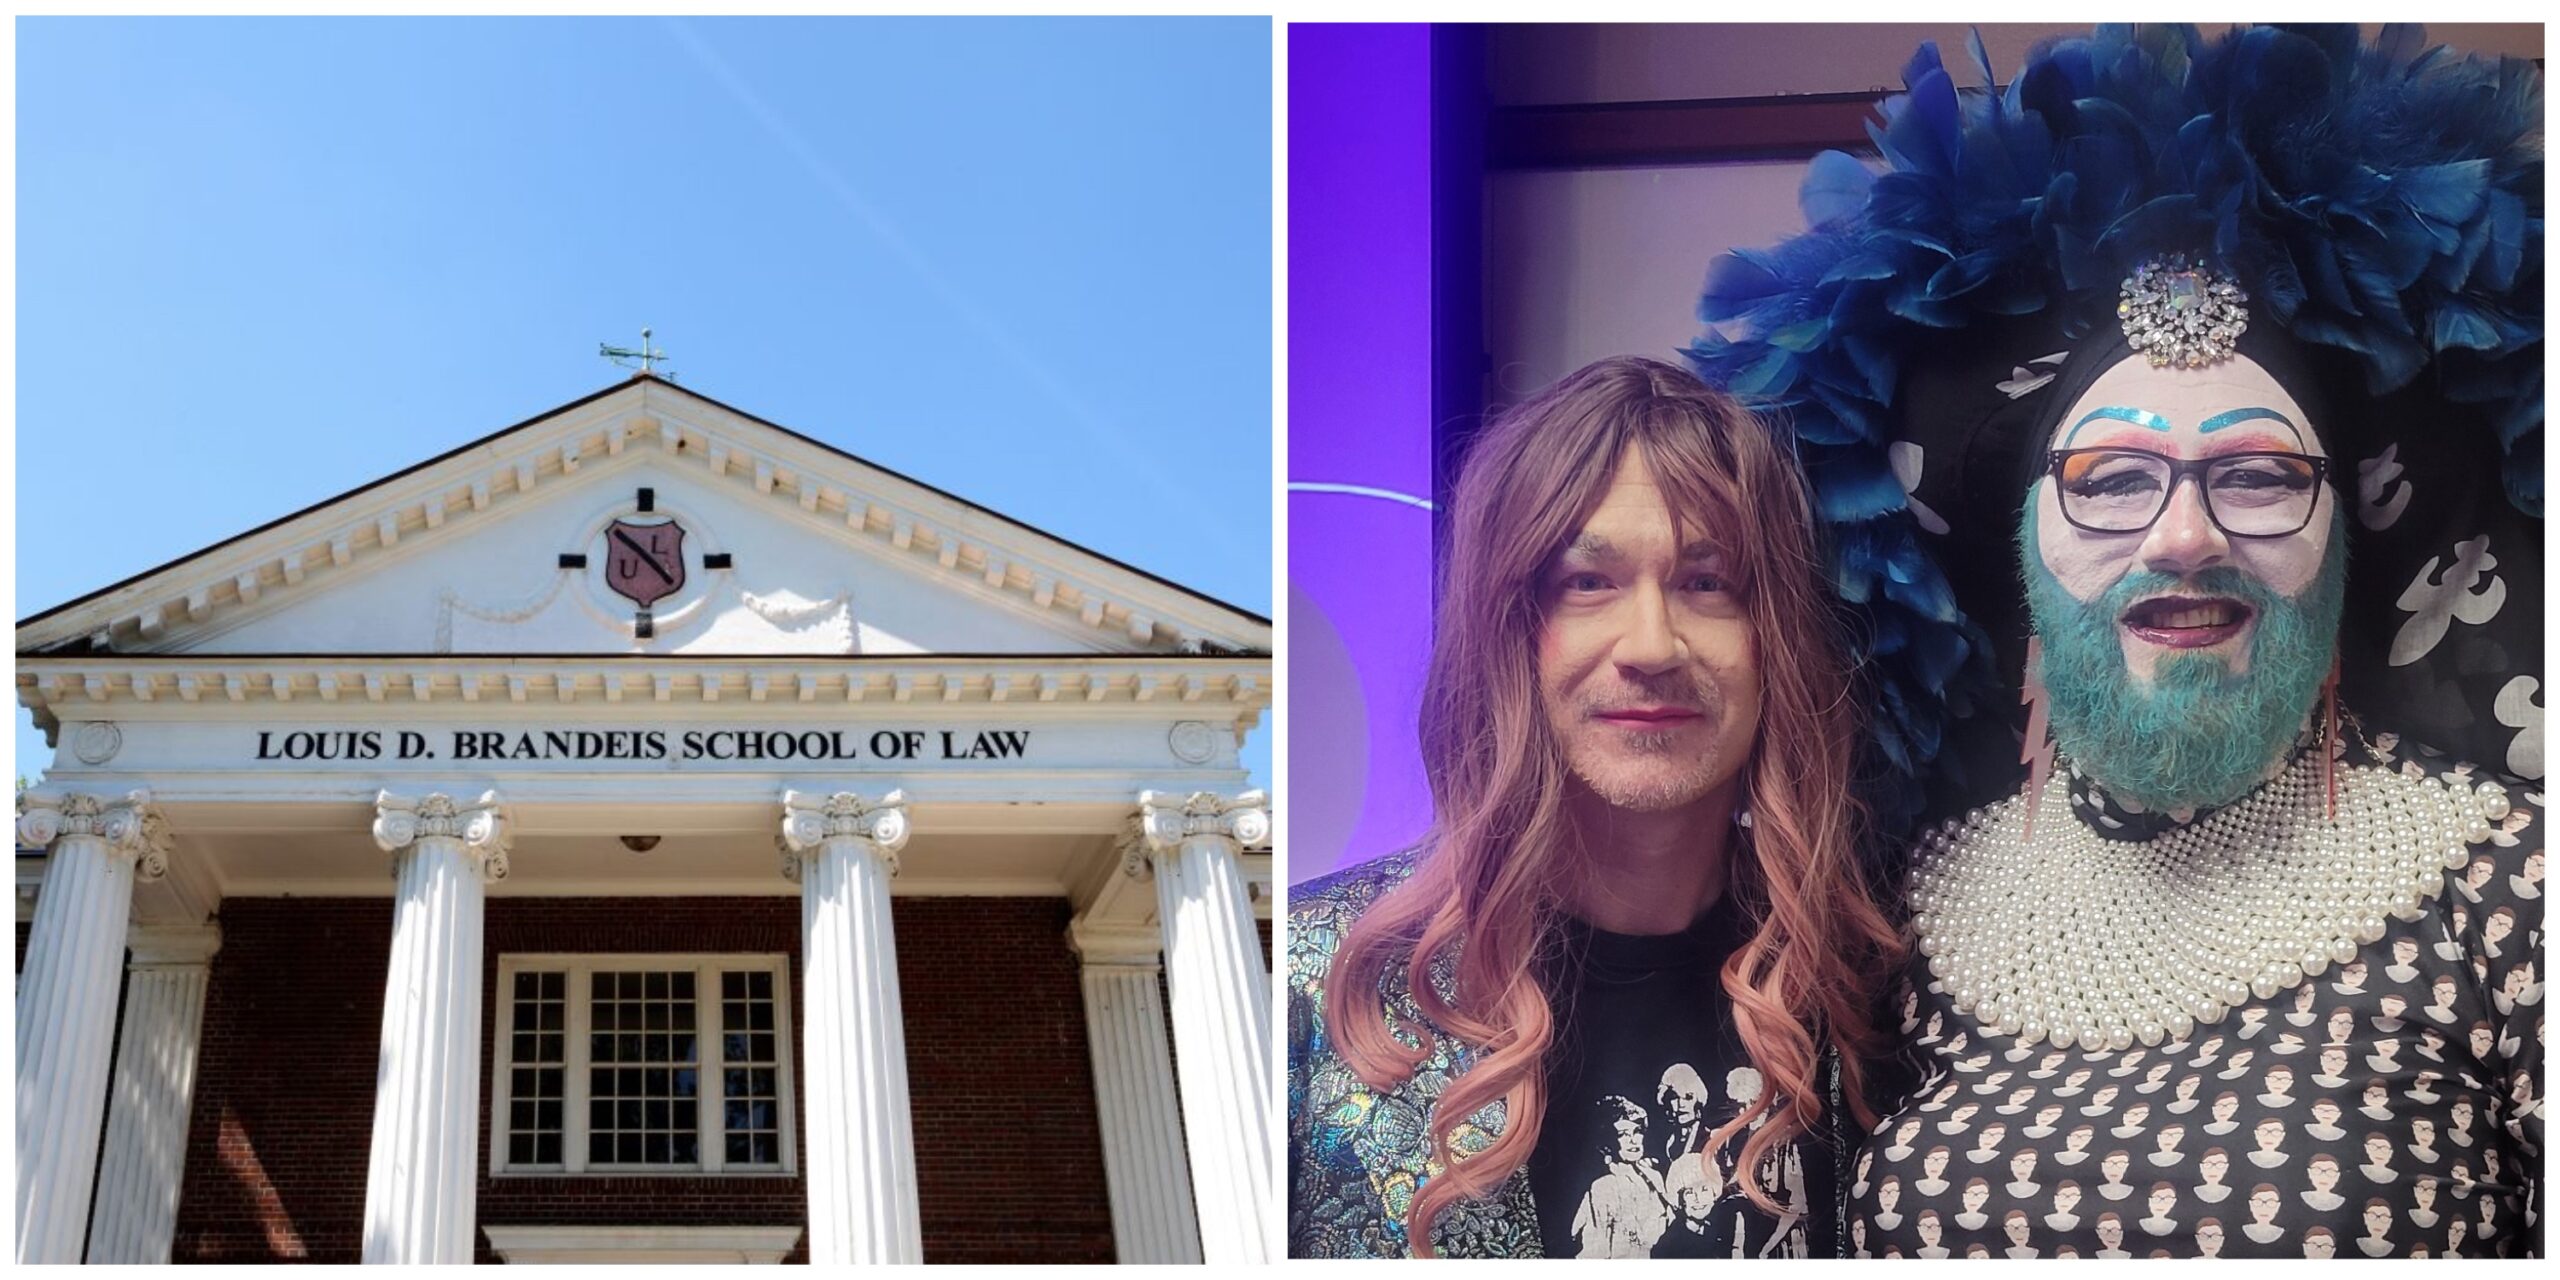 Prioritizing Activism: Law School Hosts Drag Shows and Social Justice Amid Declining Rankings